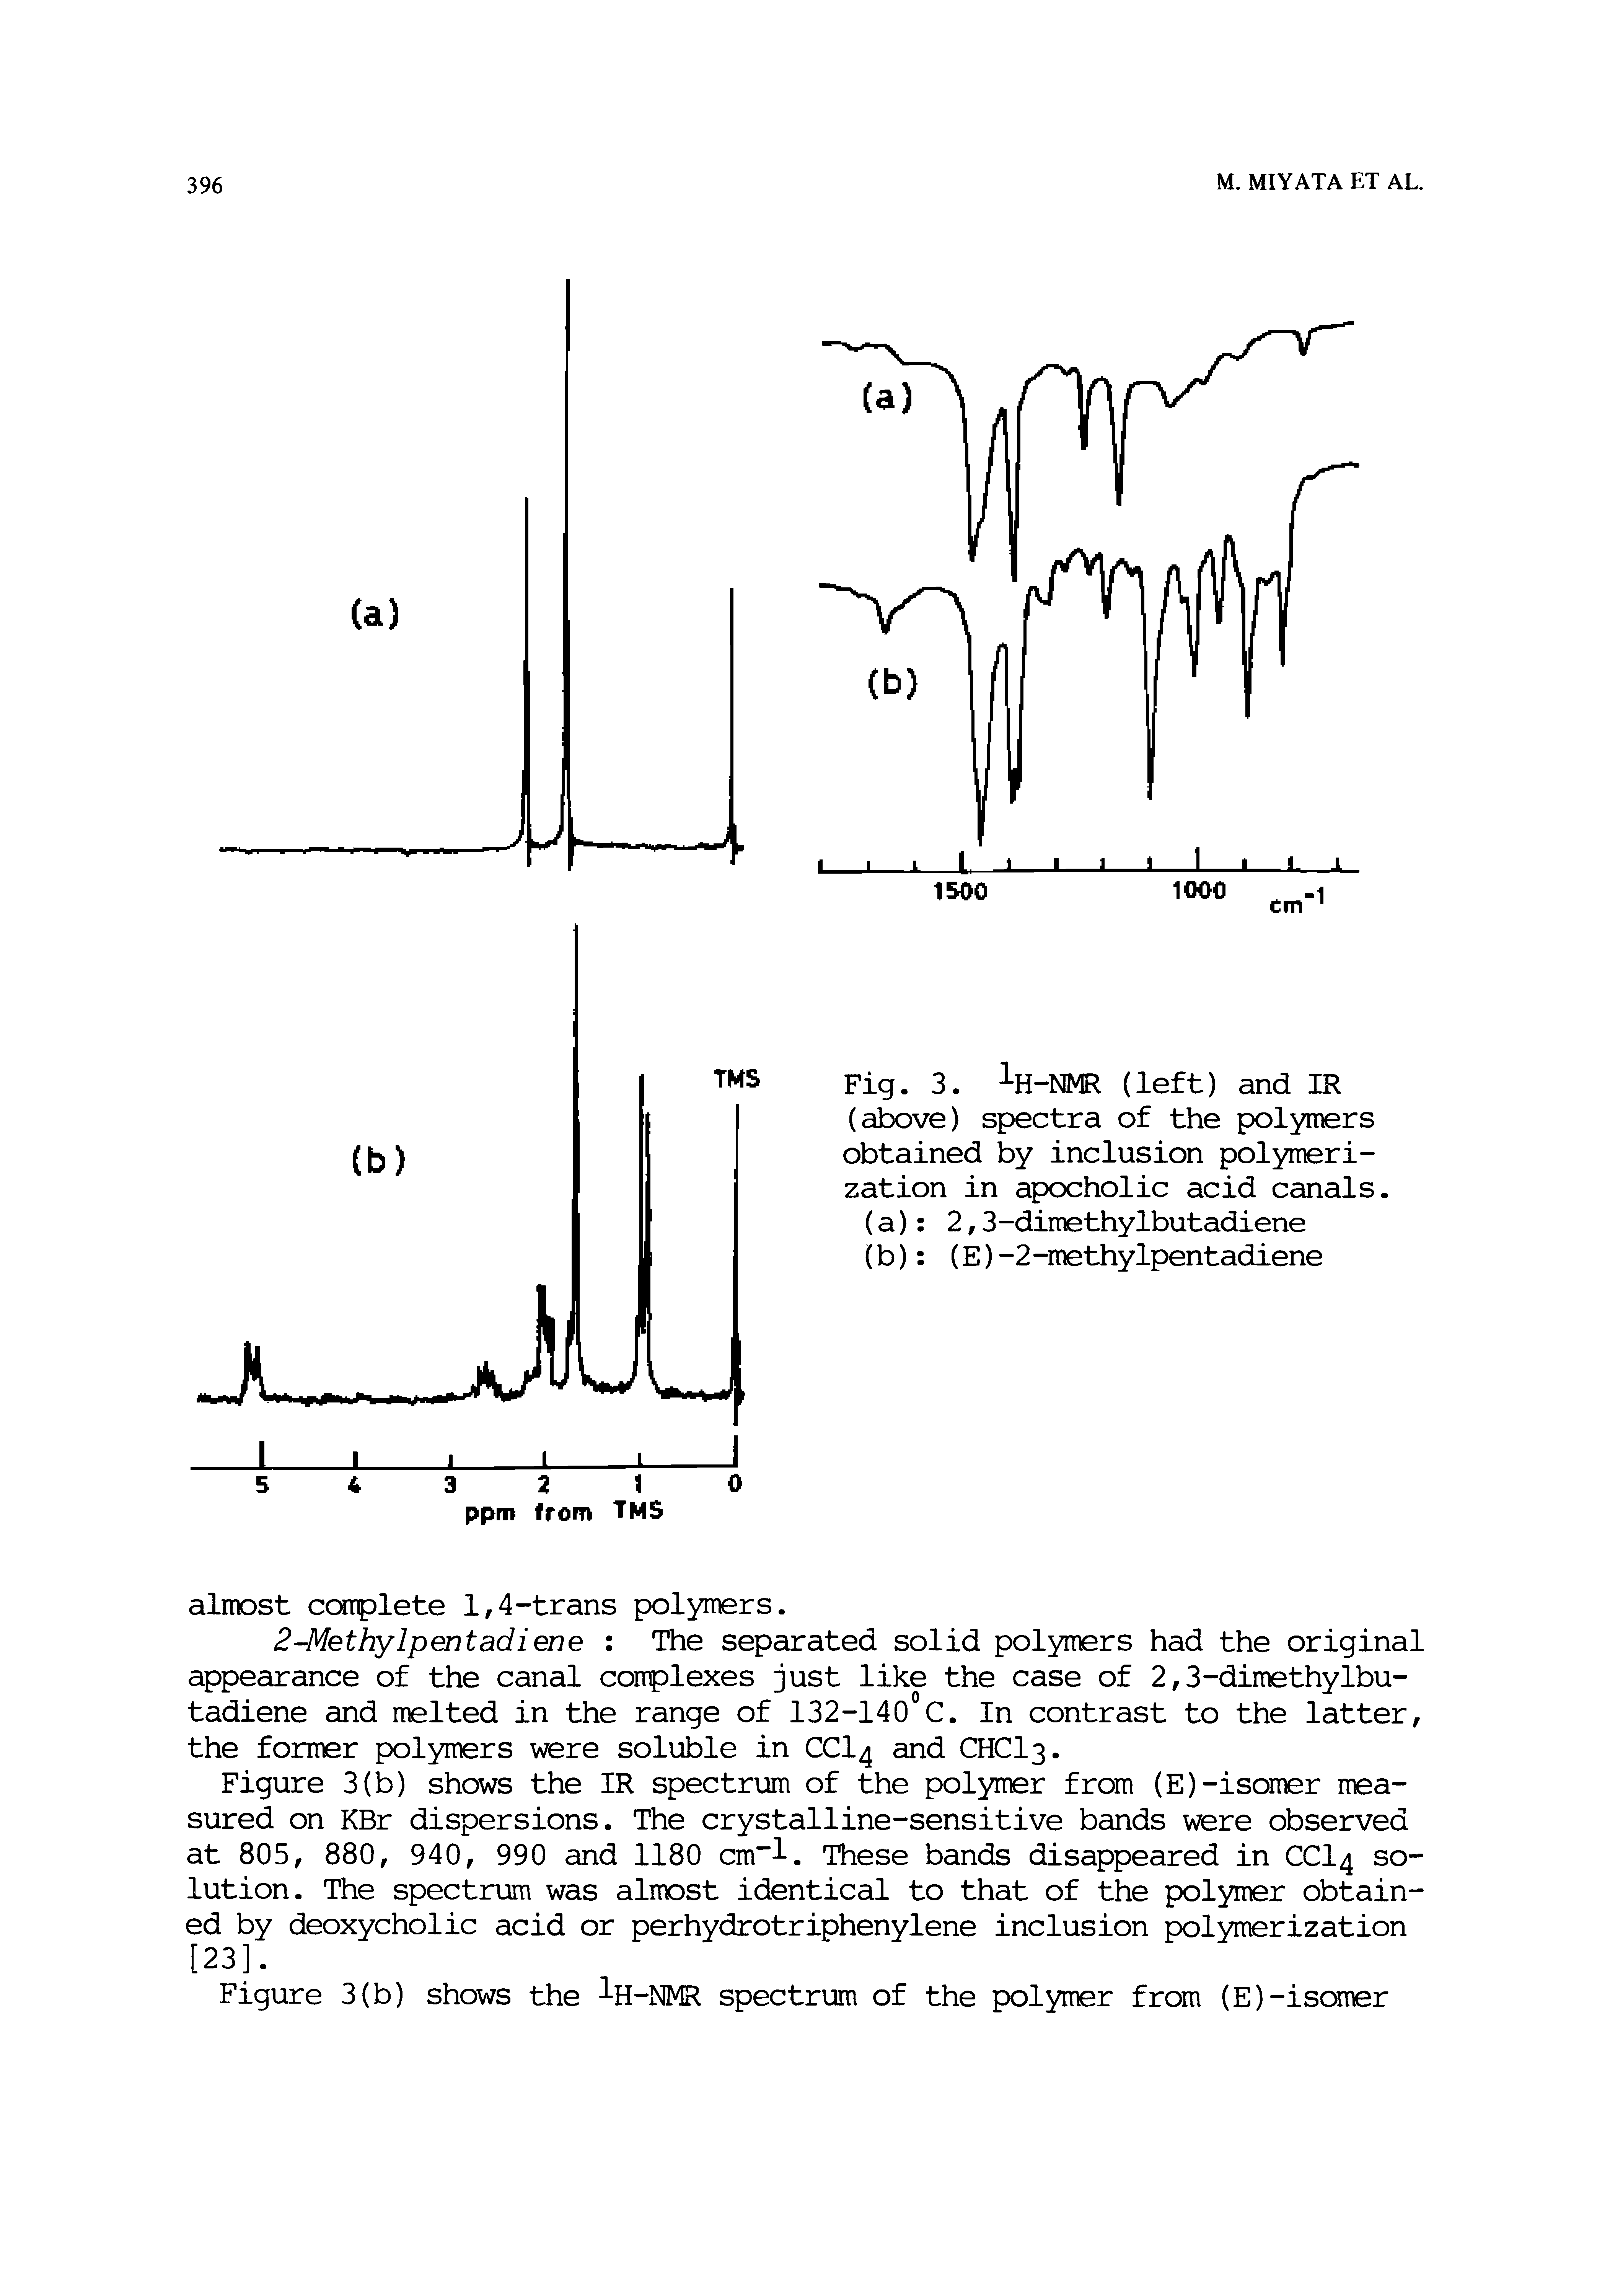 Fig. 3. %-NMR (left) and IR (above) spectra of the polymers obtained by inclusion polymerization in apocholic acid canals.